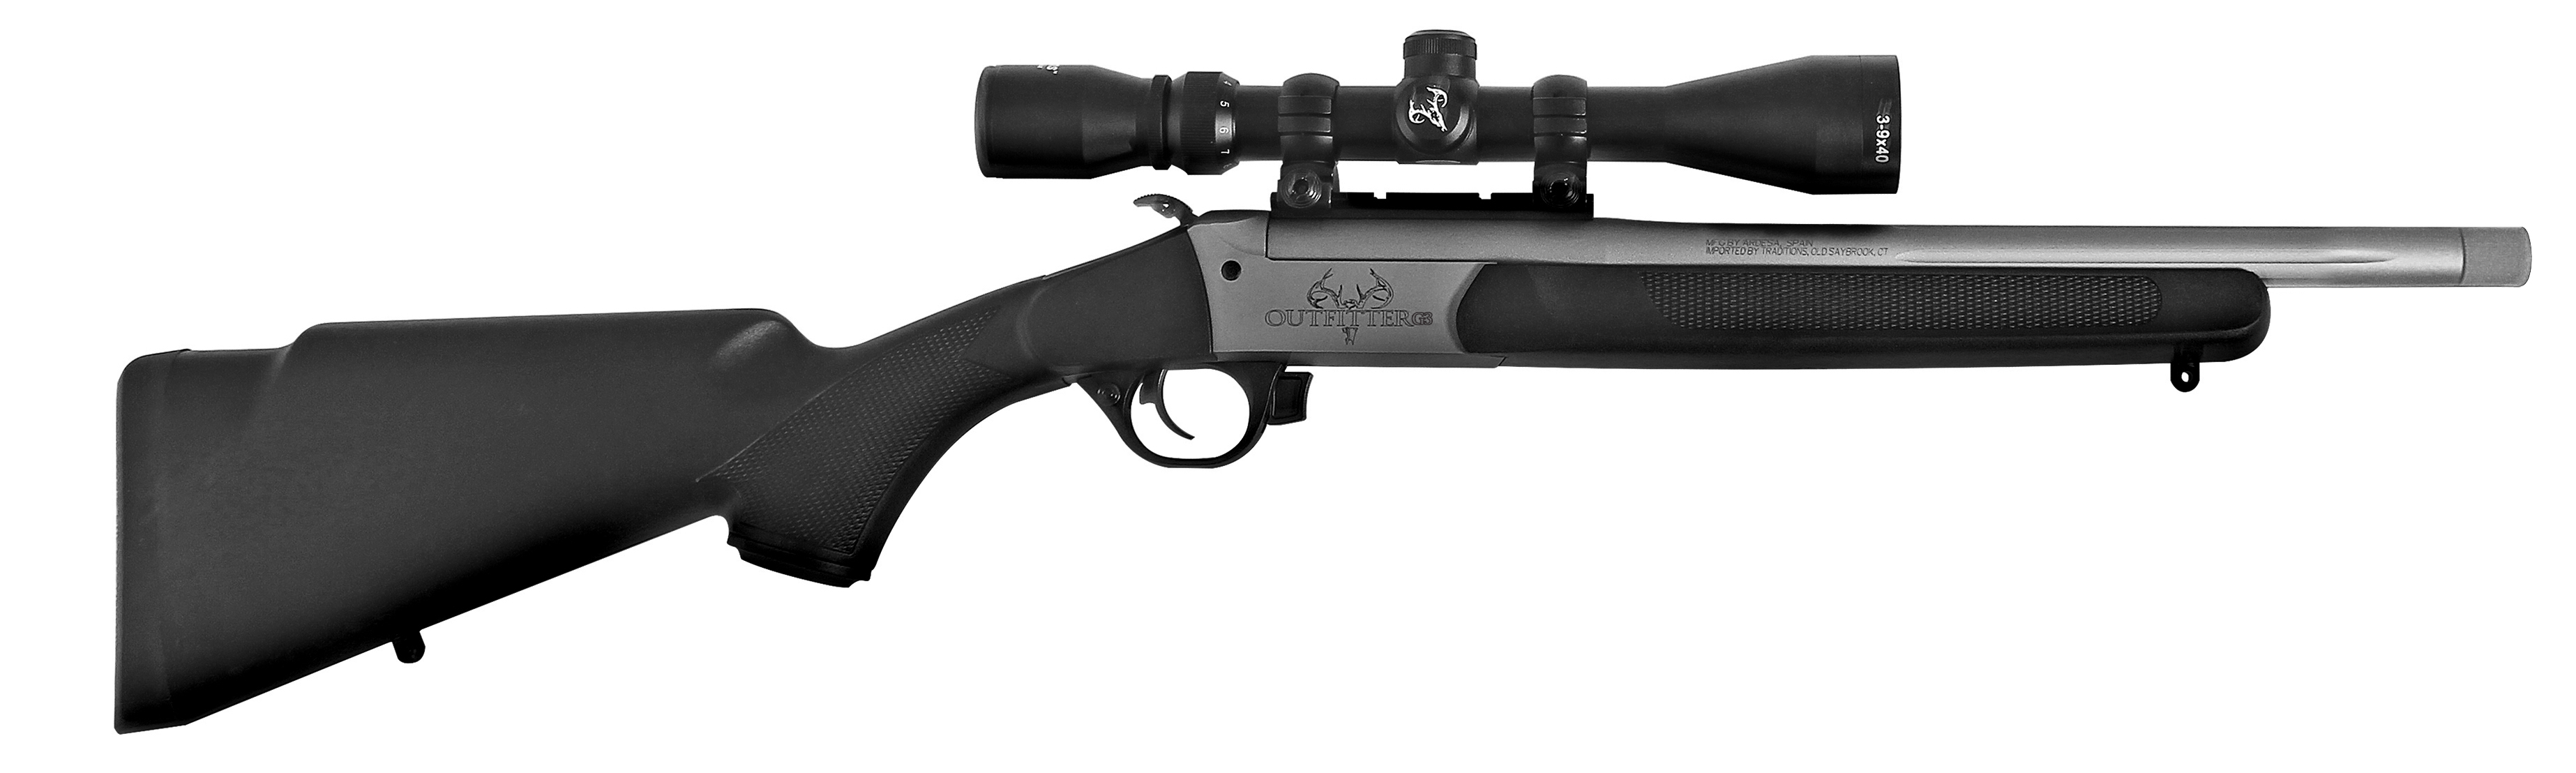 Outfitter G3 Rifle 300 AAC Blackout Black/CeraKote with 3-9x40 Scope